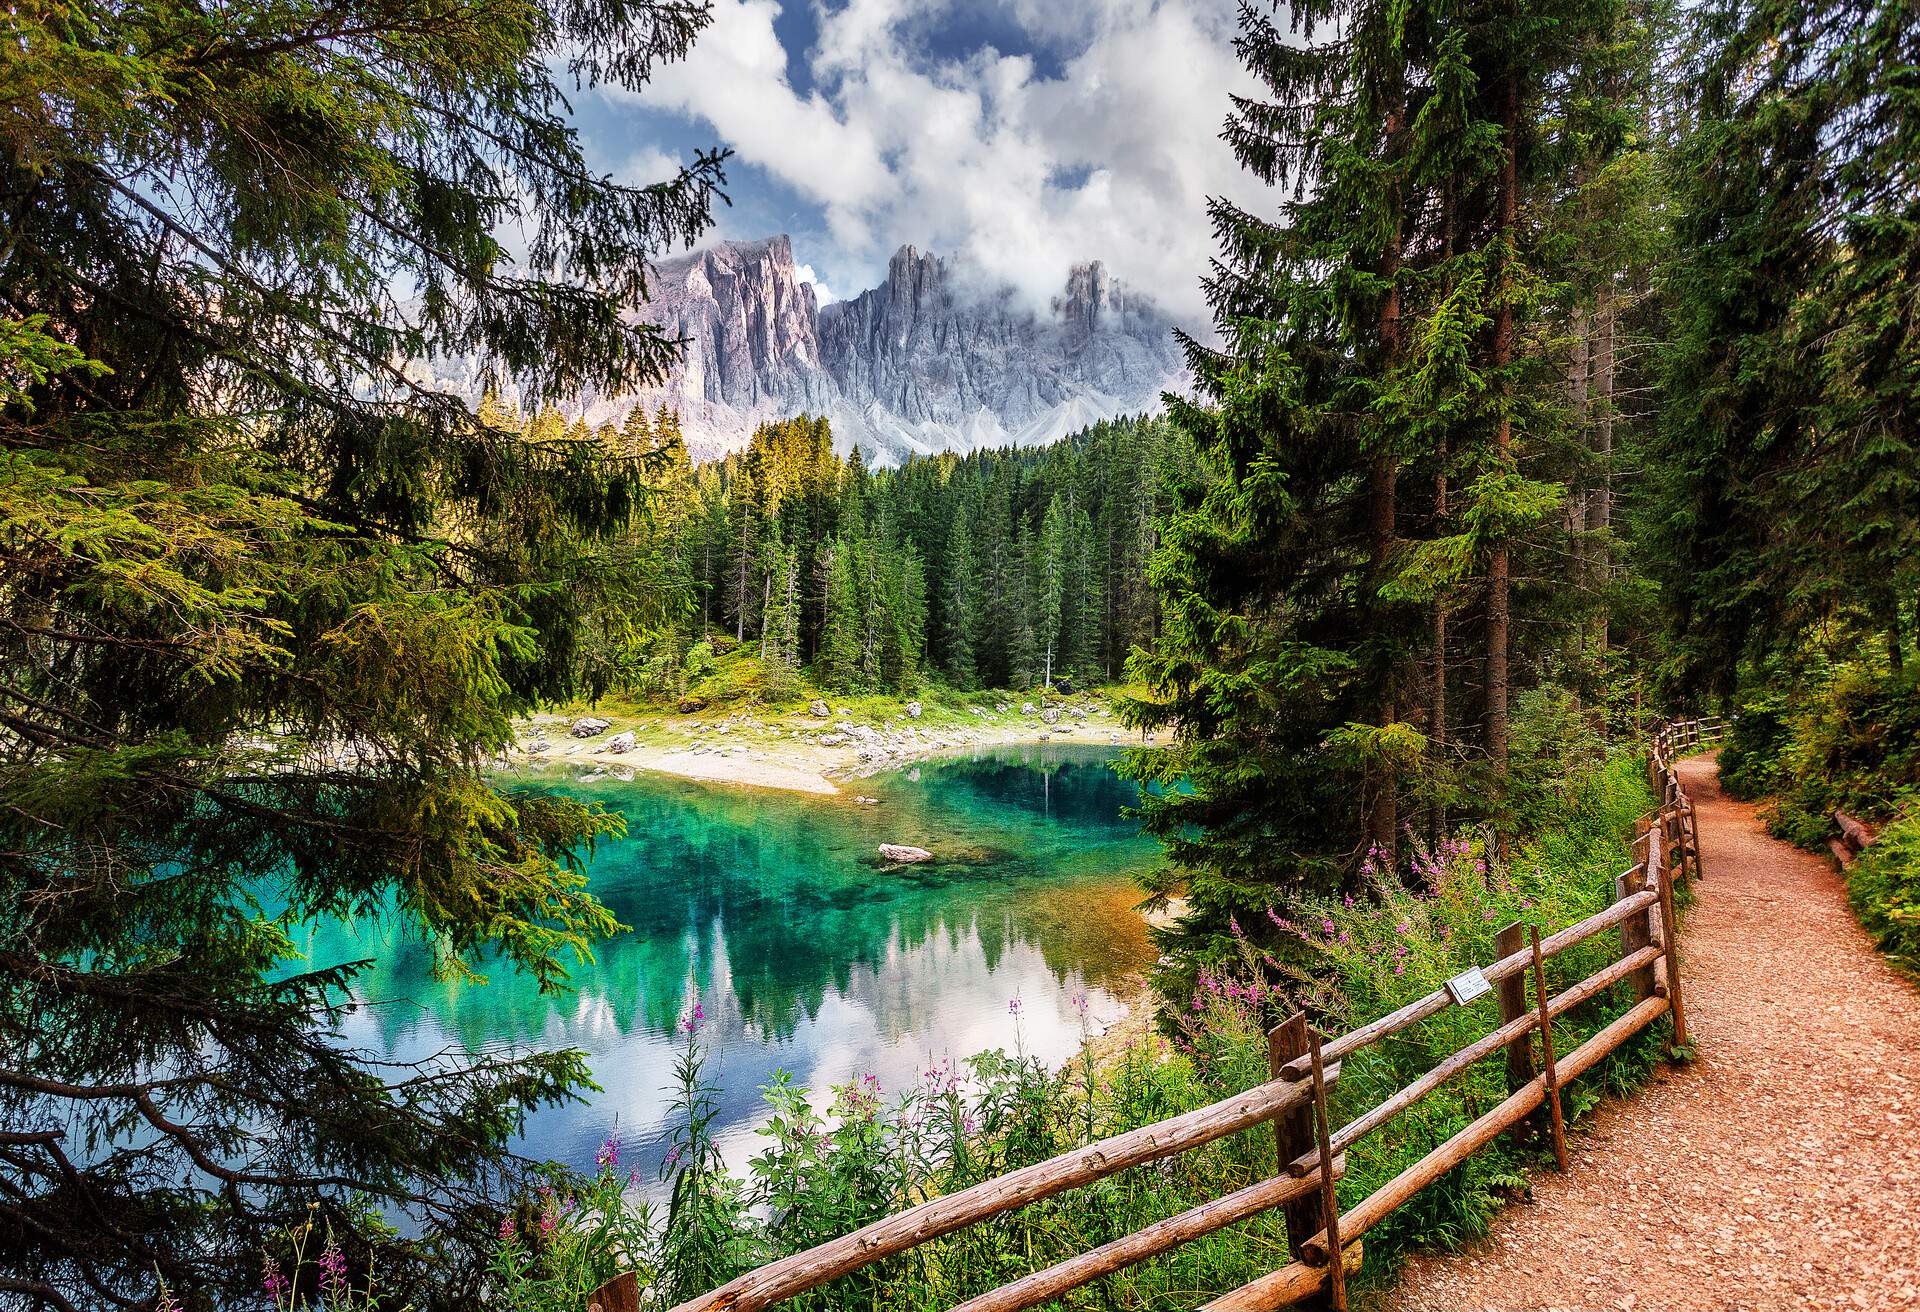 Amazing nature landscape. Lago di Carezza lake or The Karersee with reflection of mountains in the dolomite alps, Dolomites, Tyrol, Italy. Concept of ideal resting place. Popular travel destination.